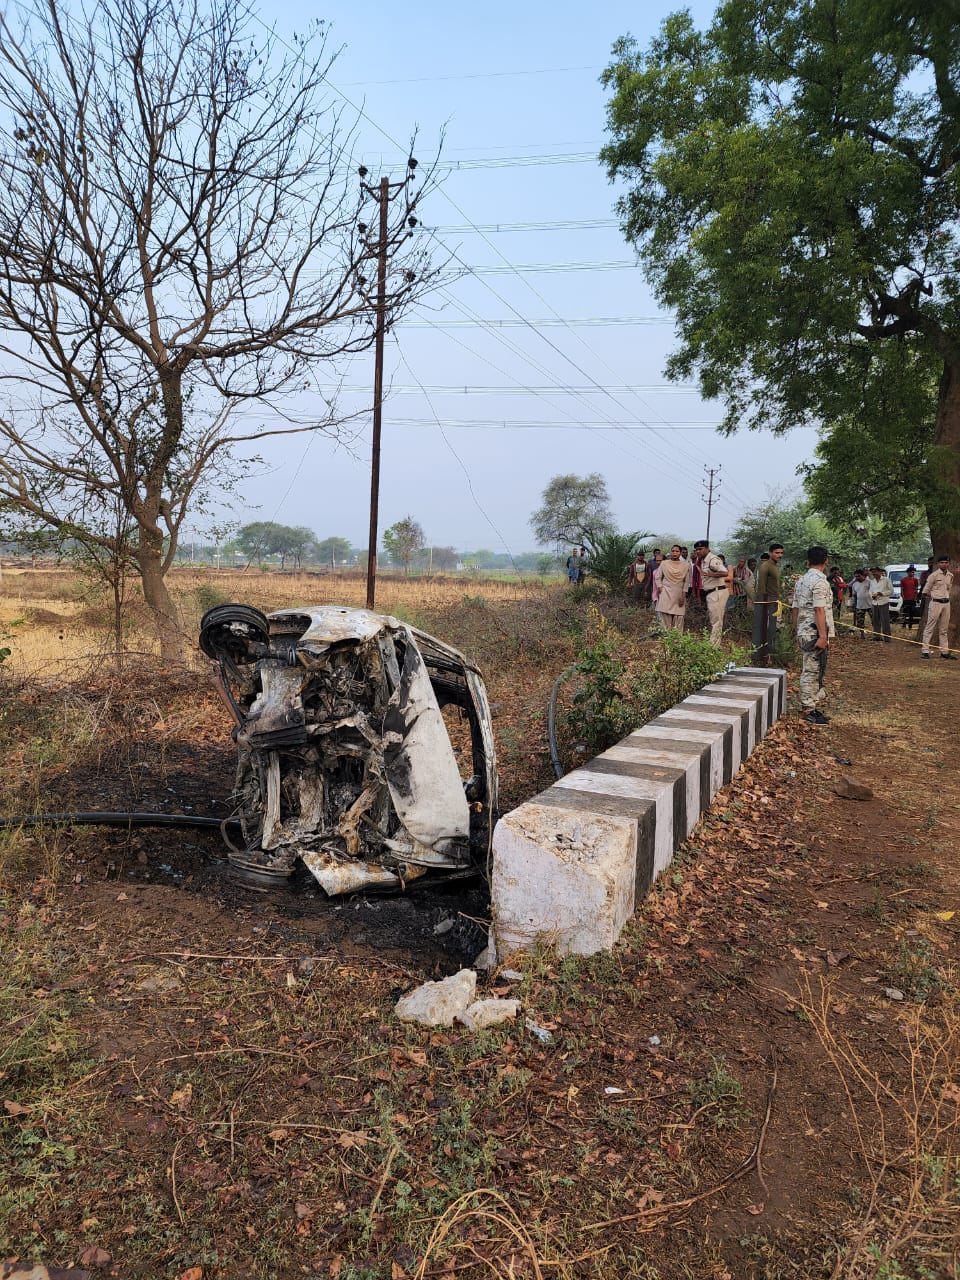 Family burnt alive after car accident in Rajnandgaon